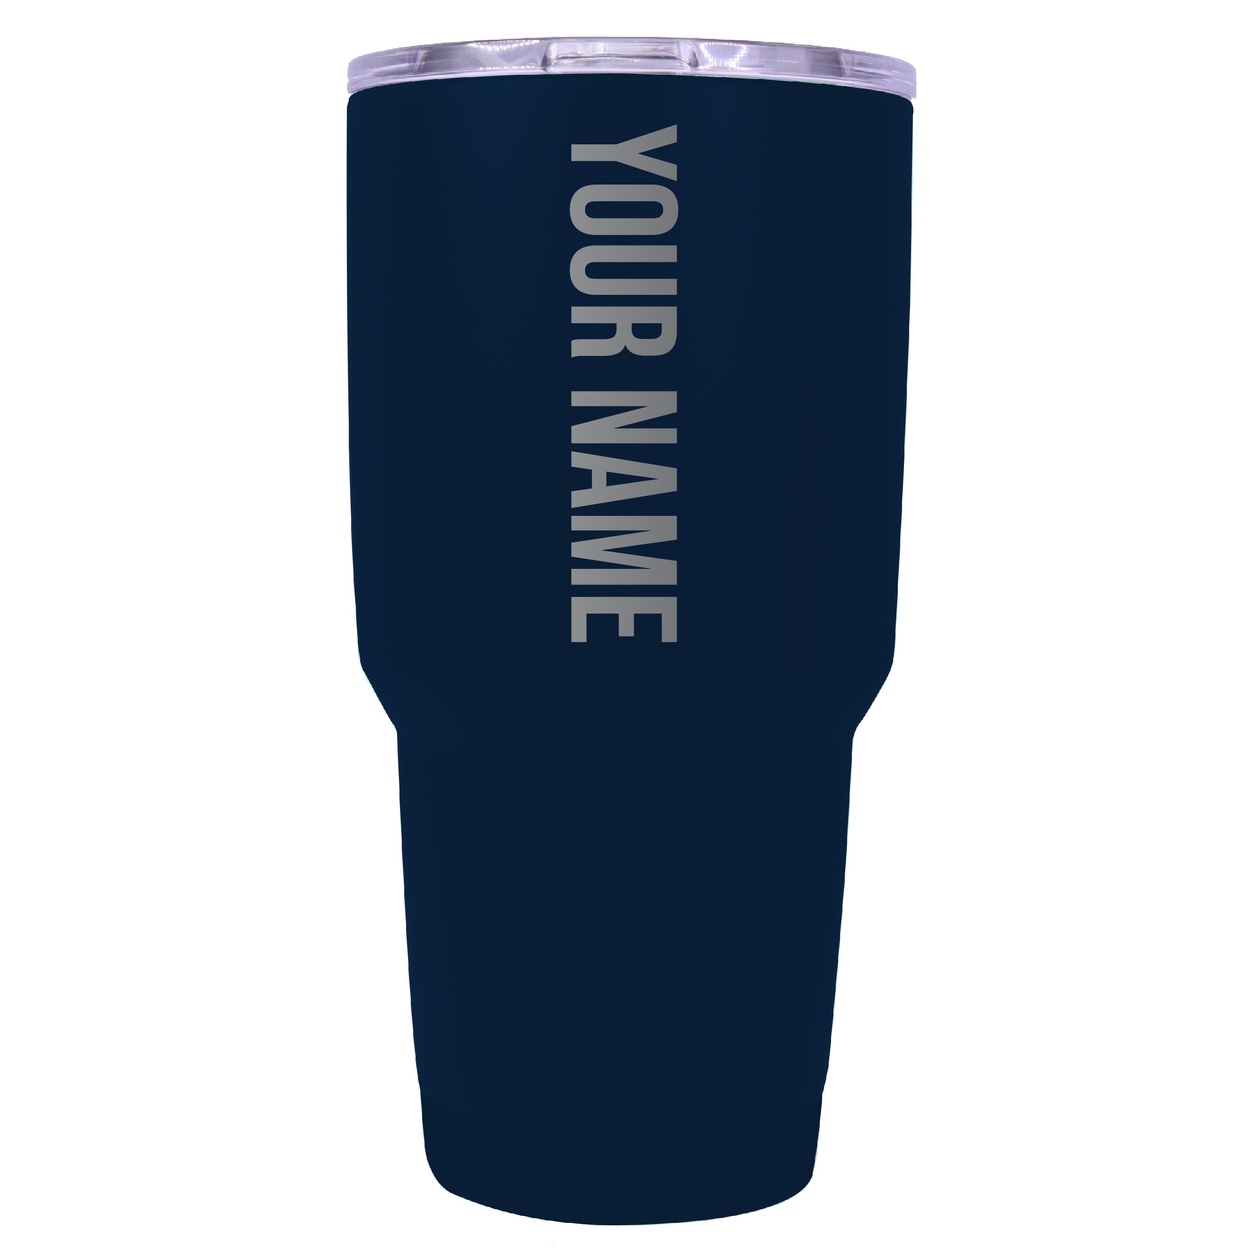 Customizable Laser Etched 24 Oz Insulated Stainless Steel Tumbler Personalized With Custom Name Or Message - Navy, 2 Pack